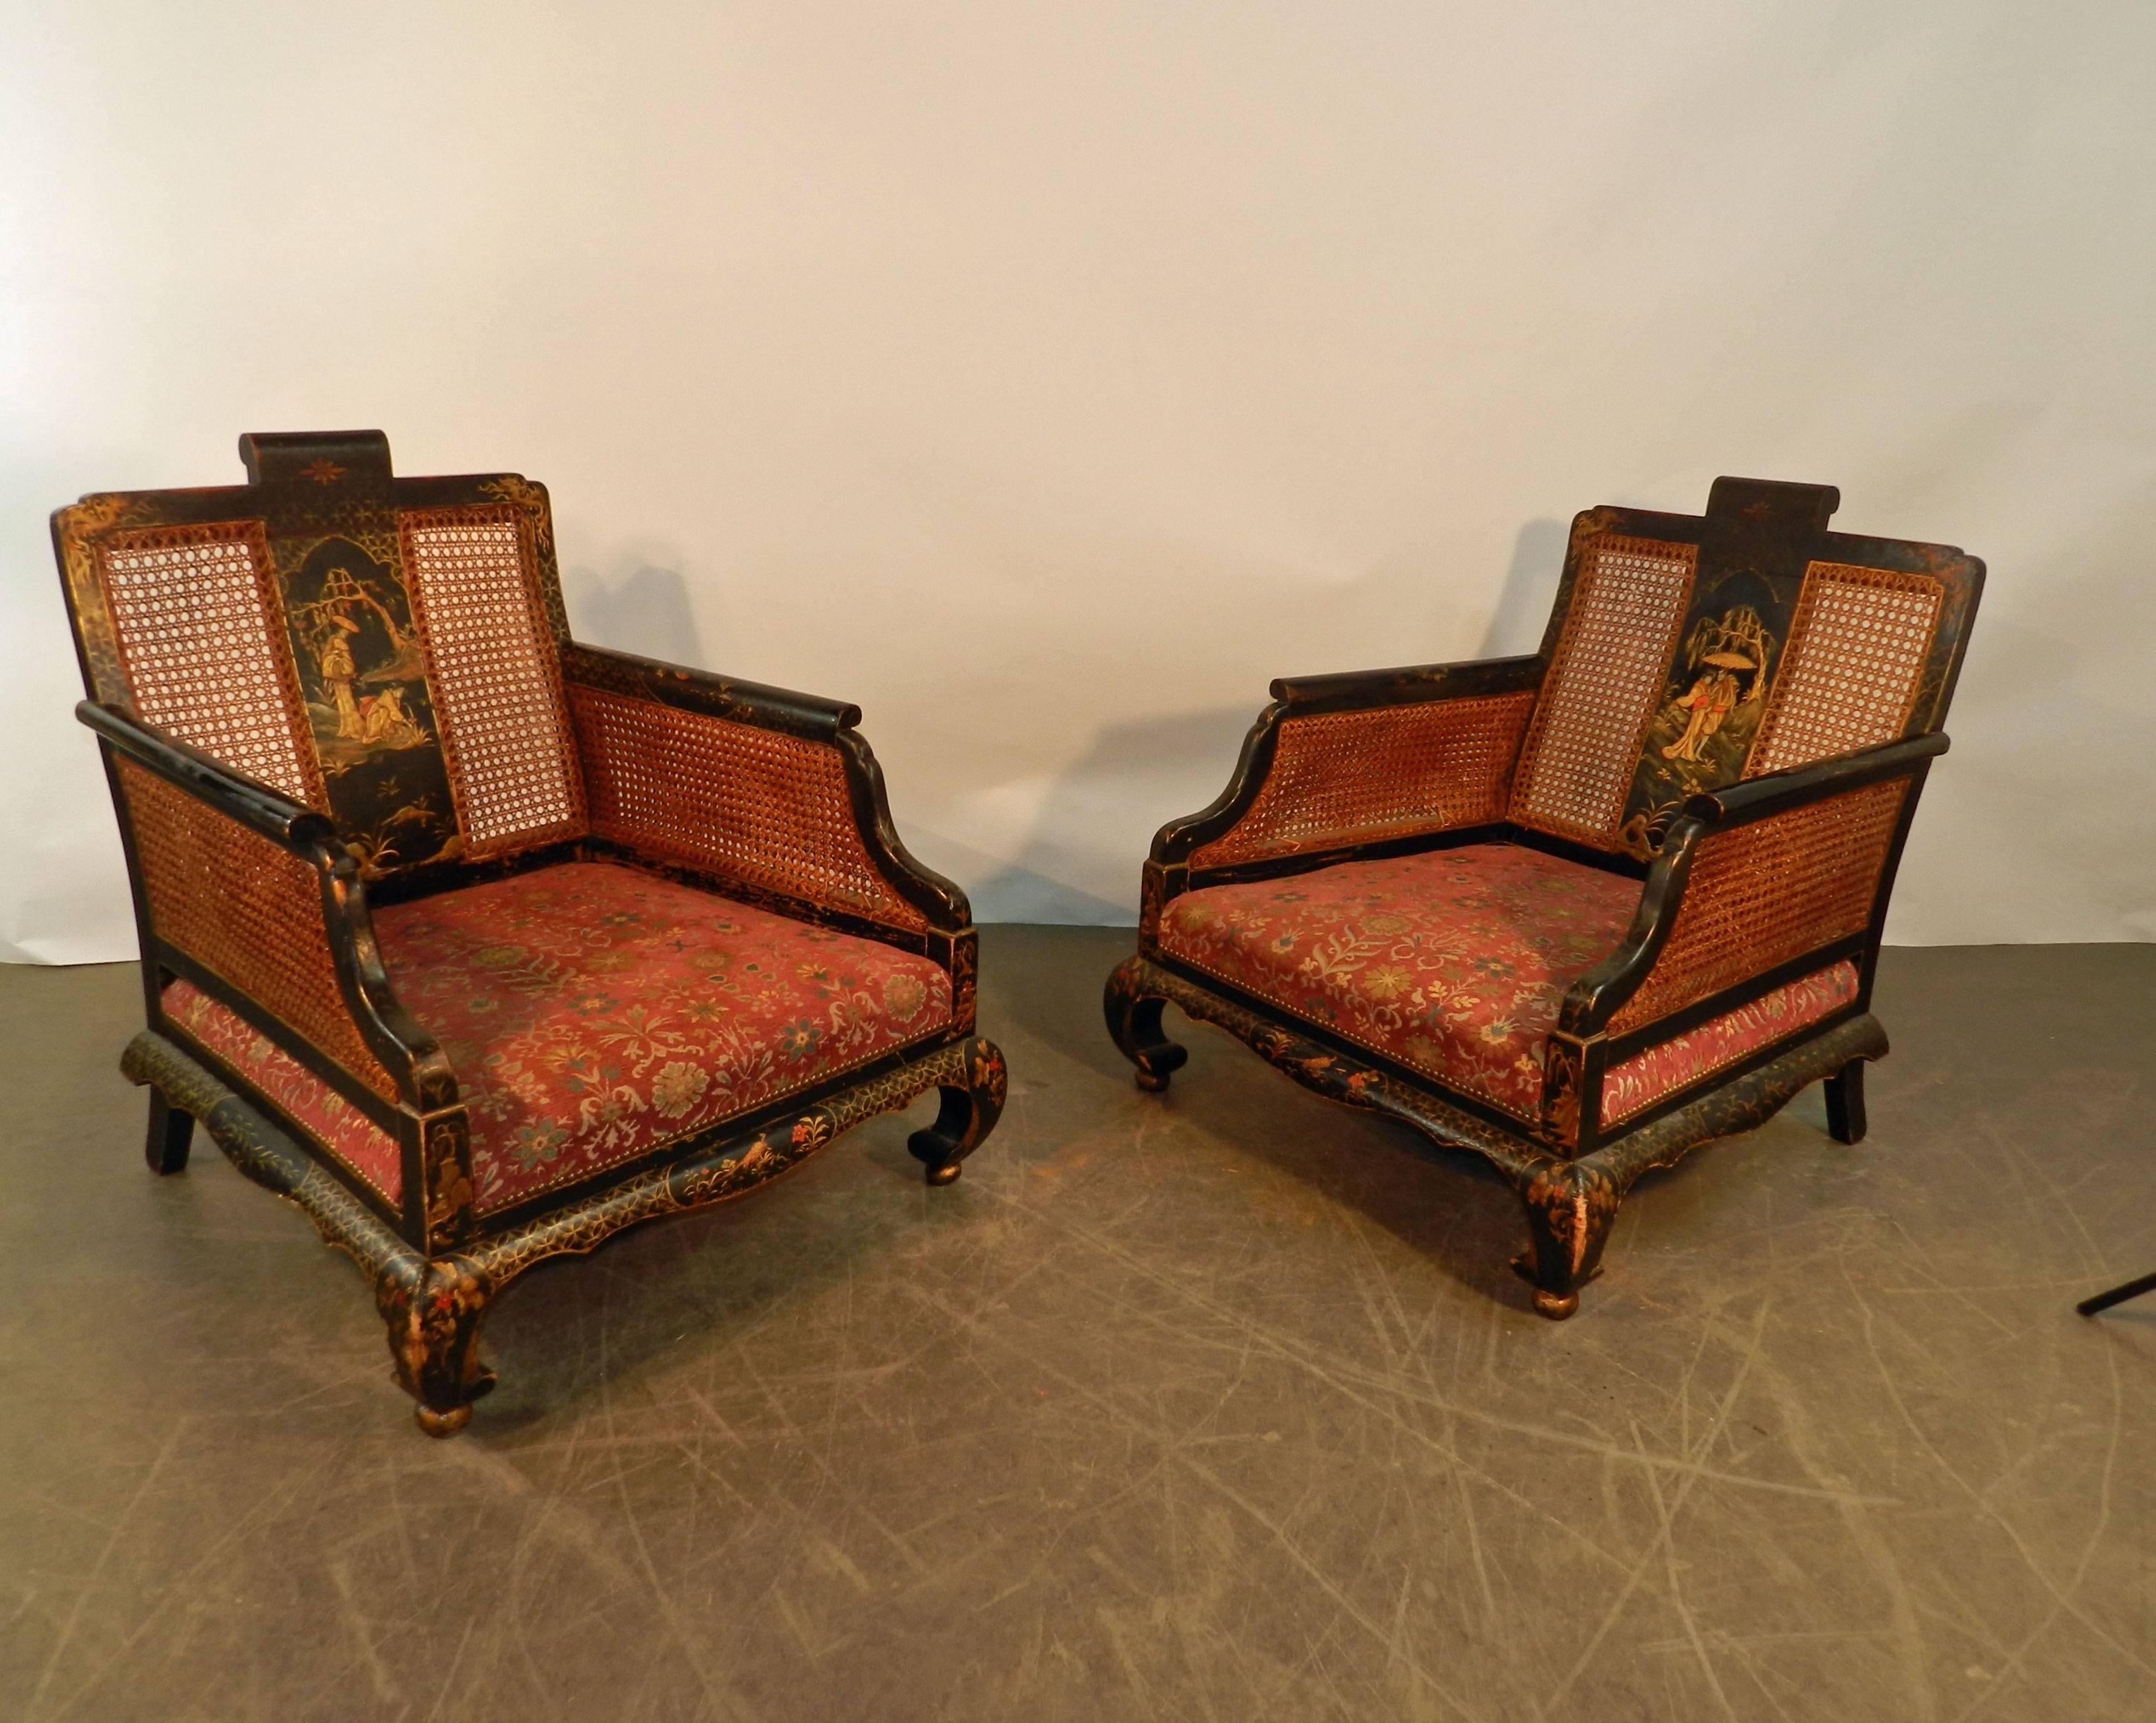 Pair of Lacquered Wood Armchairs, China, 19th Century 2